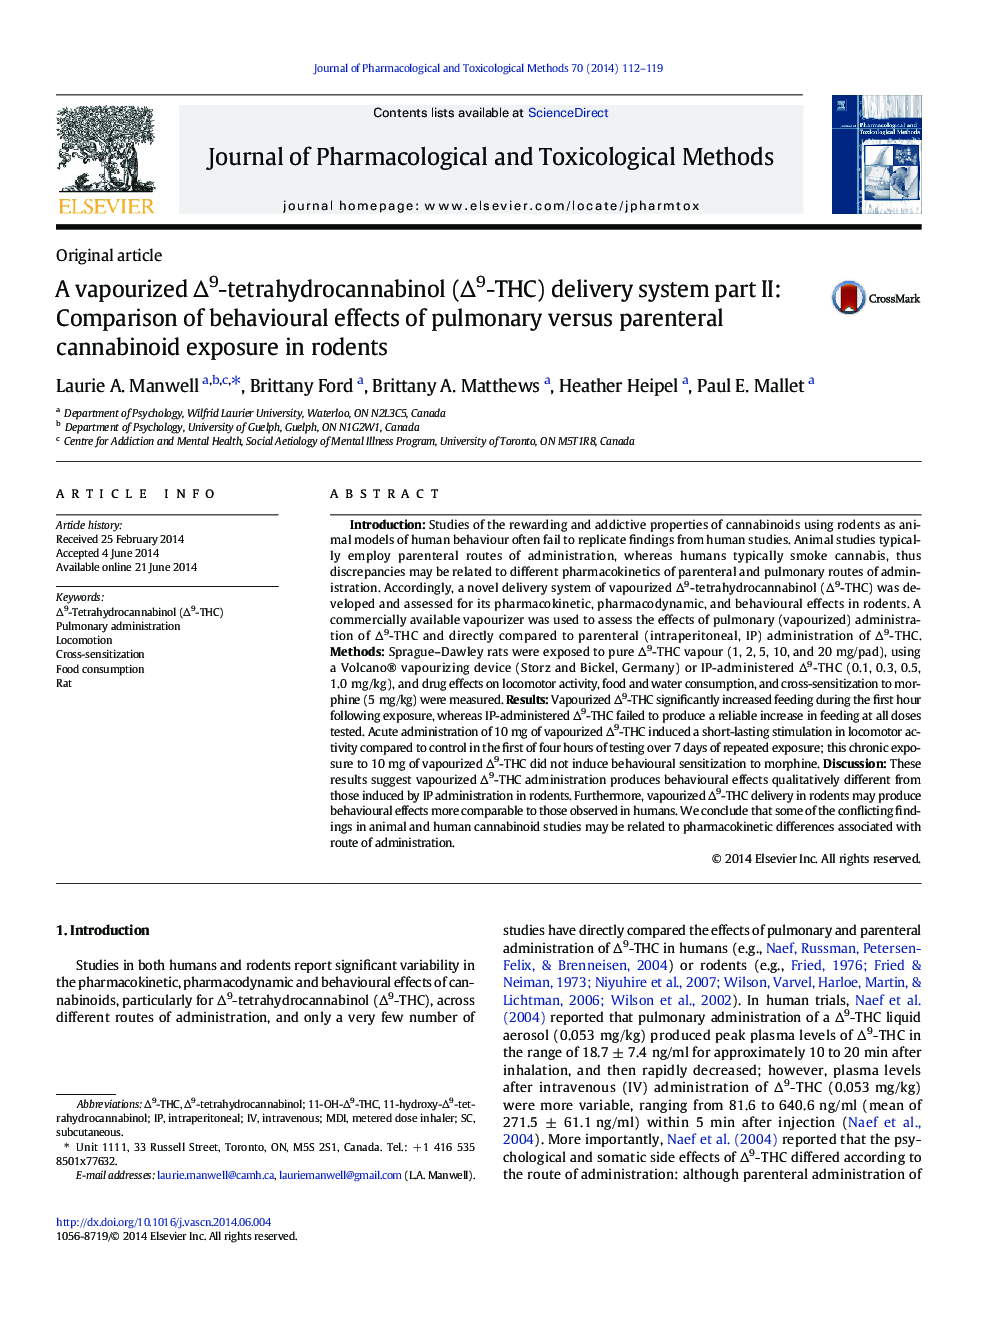 A vapourized Δ9-tetrahydrocannabinol (Δ9-THC) delivery system part II: Comparison of behavioural effects of pulmonary versus parenteral cannabinoid exposure in rodents